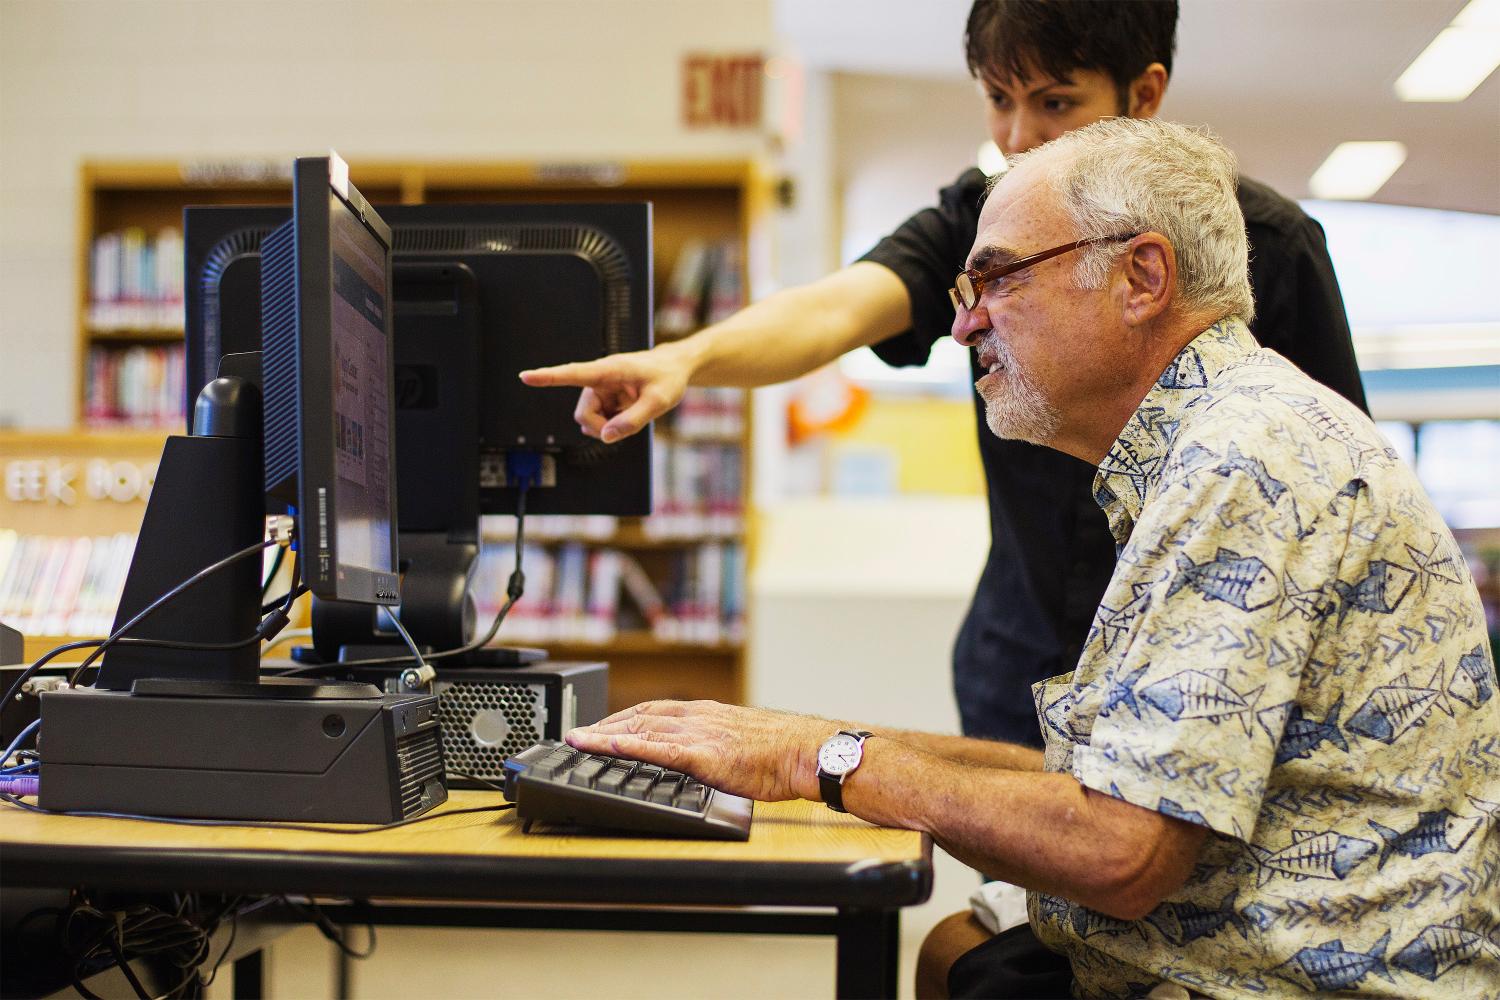 Child explains to a senior how to use a computer